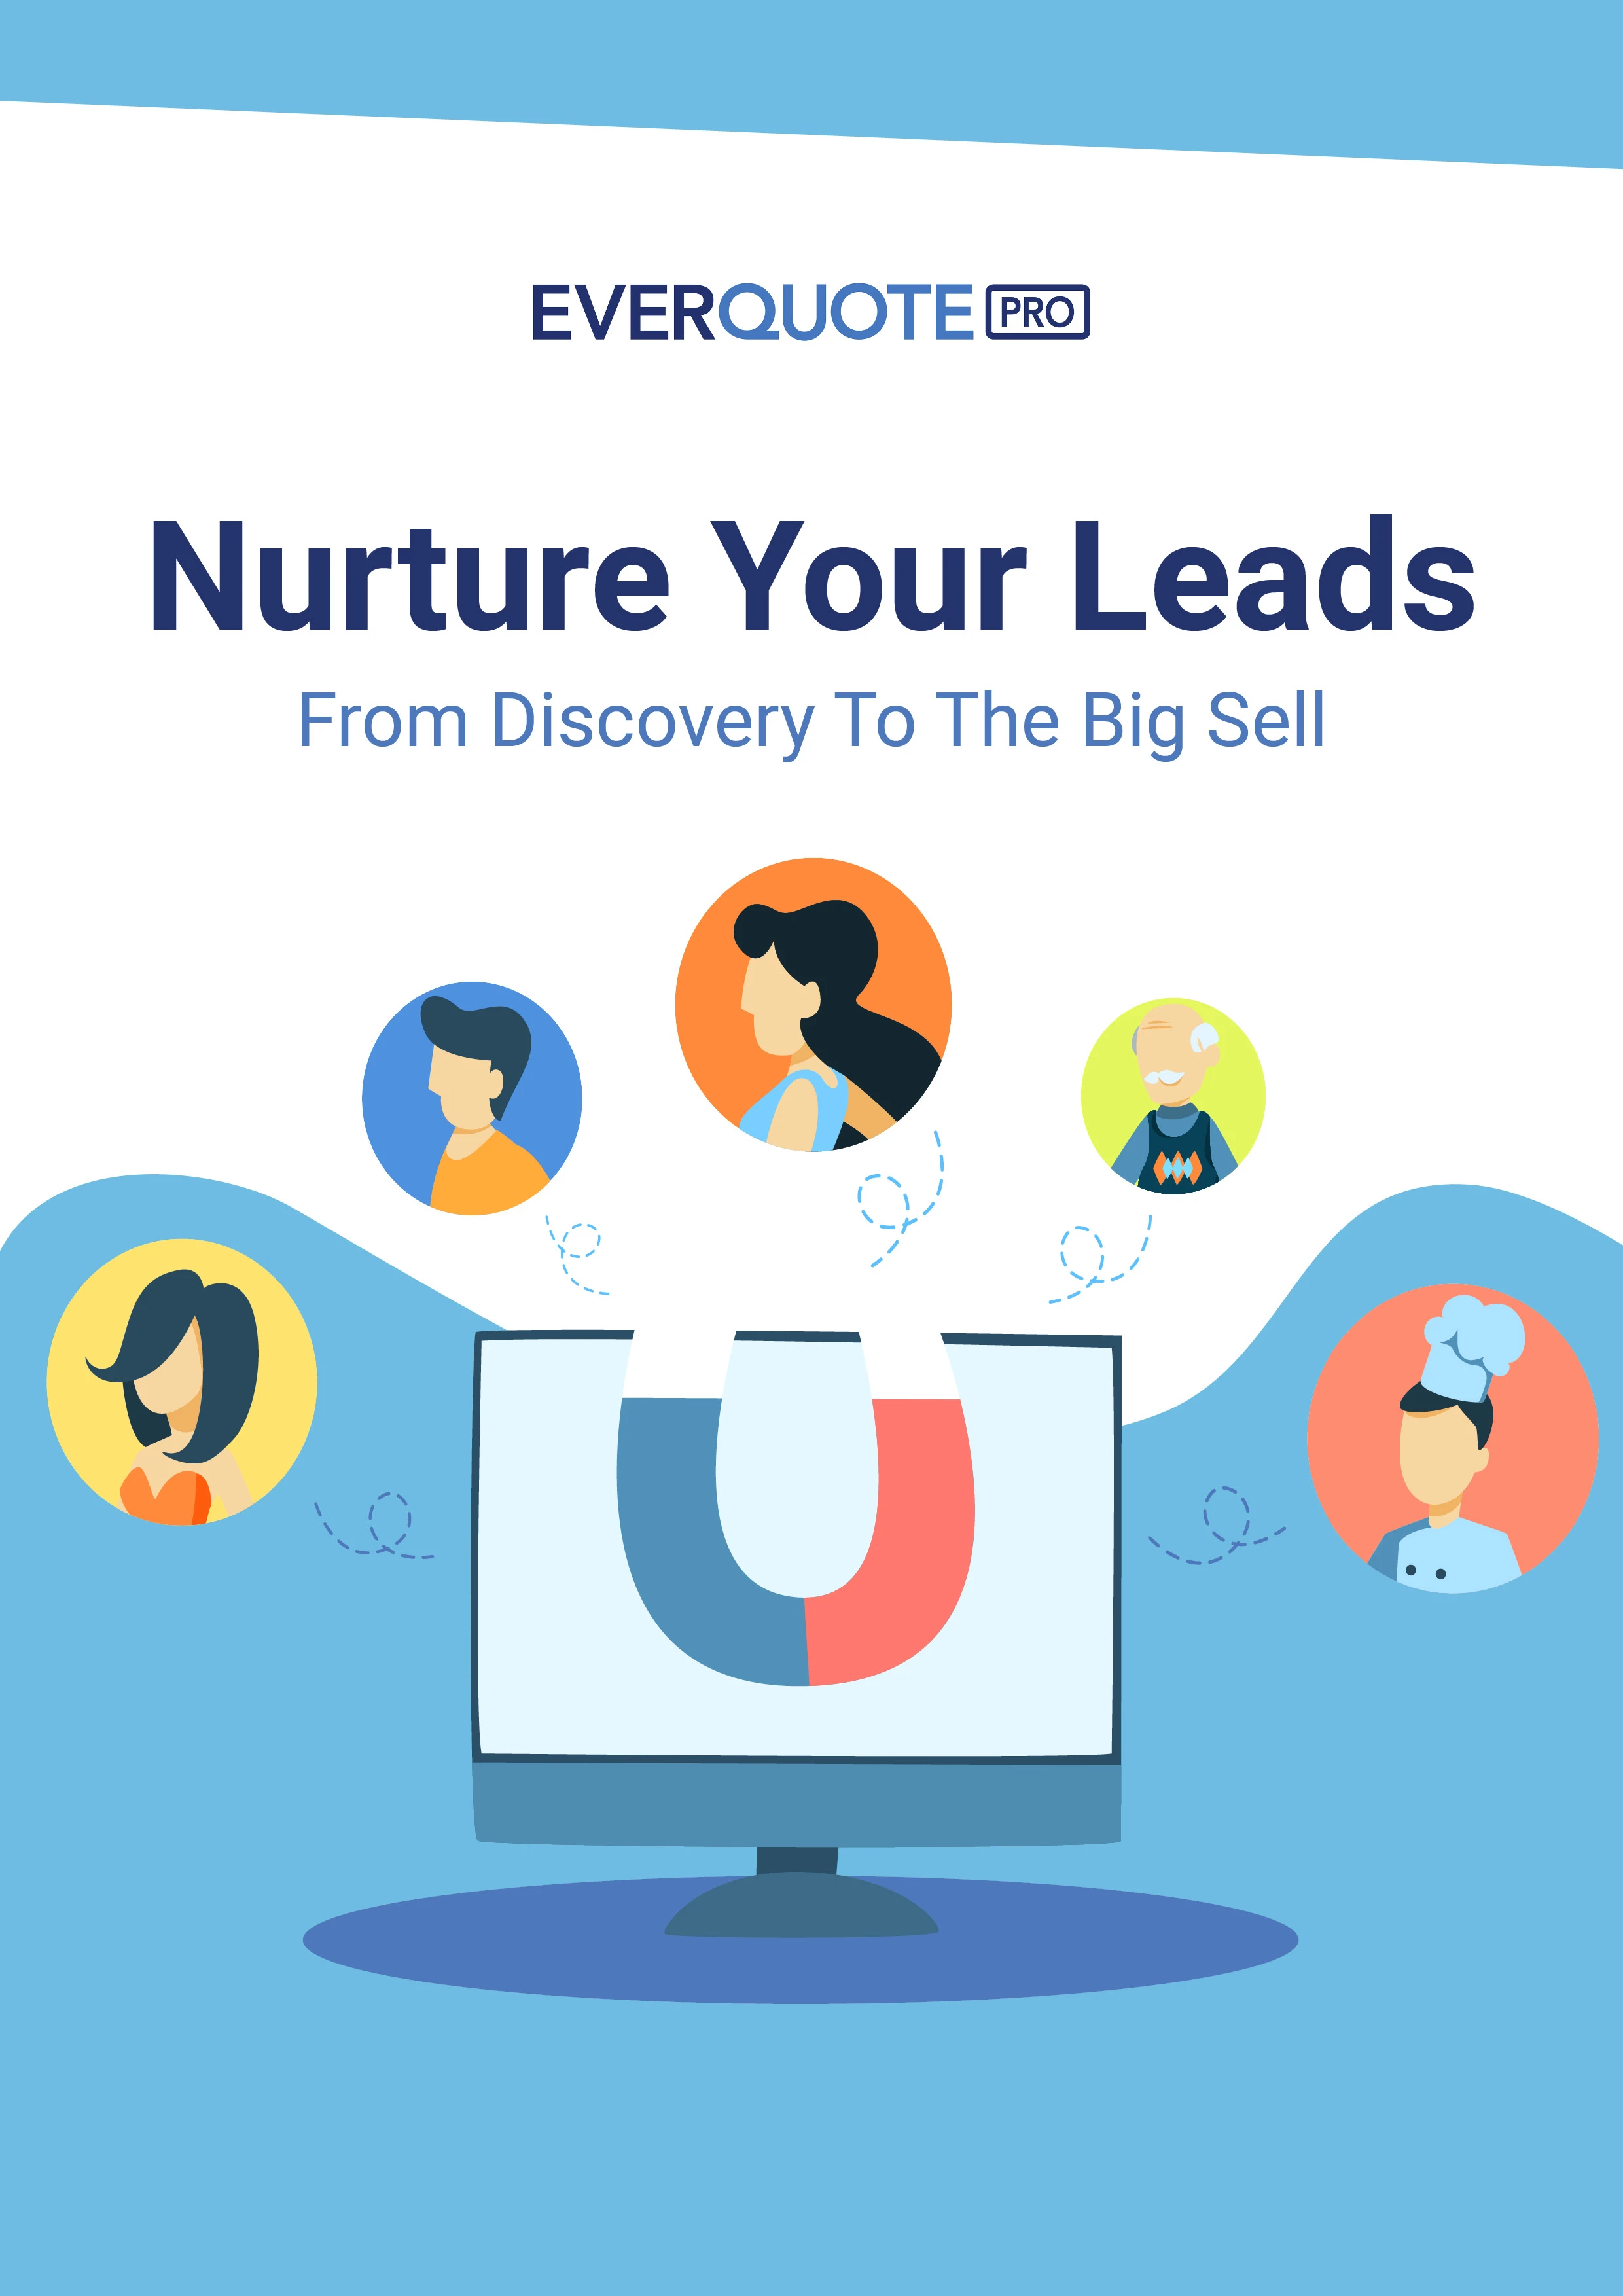 Nurture Your Leads: From Discovery To The Big Sell - EverQuote